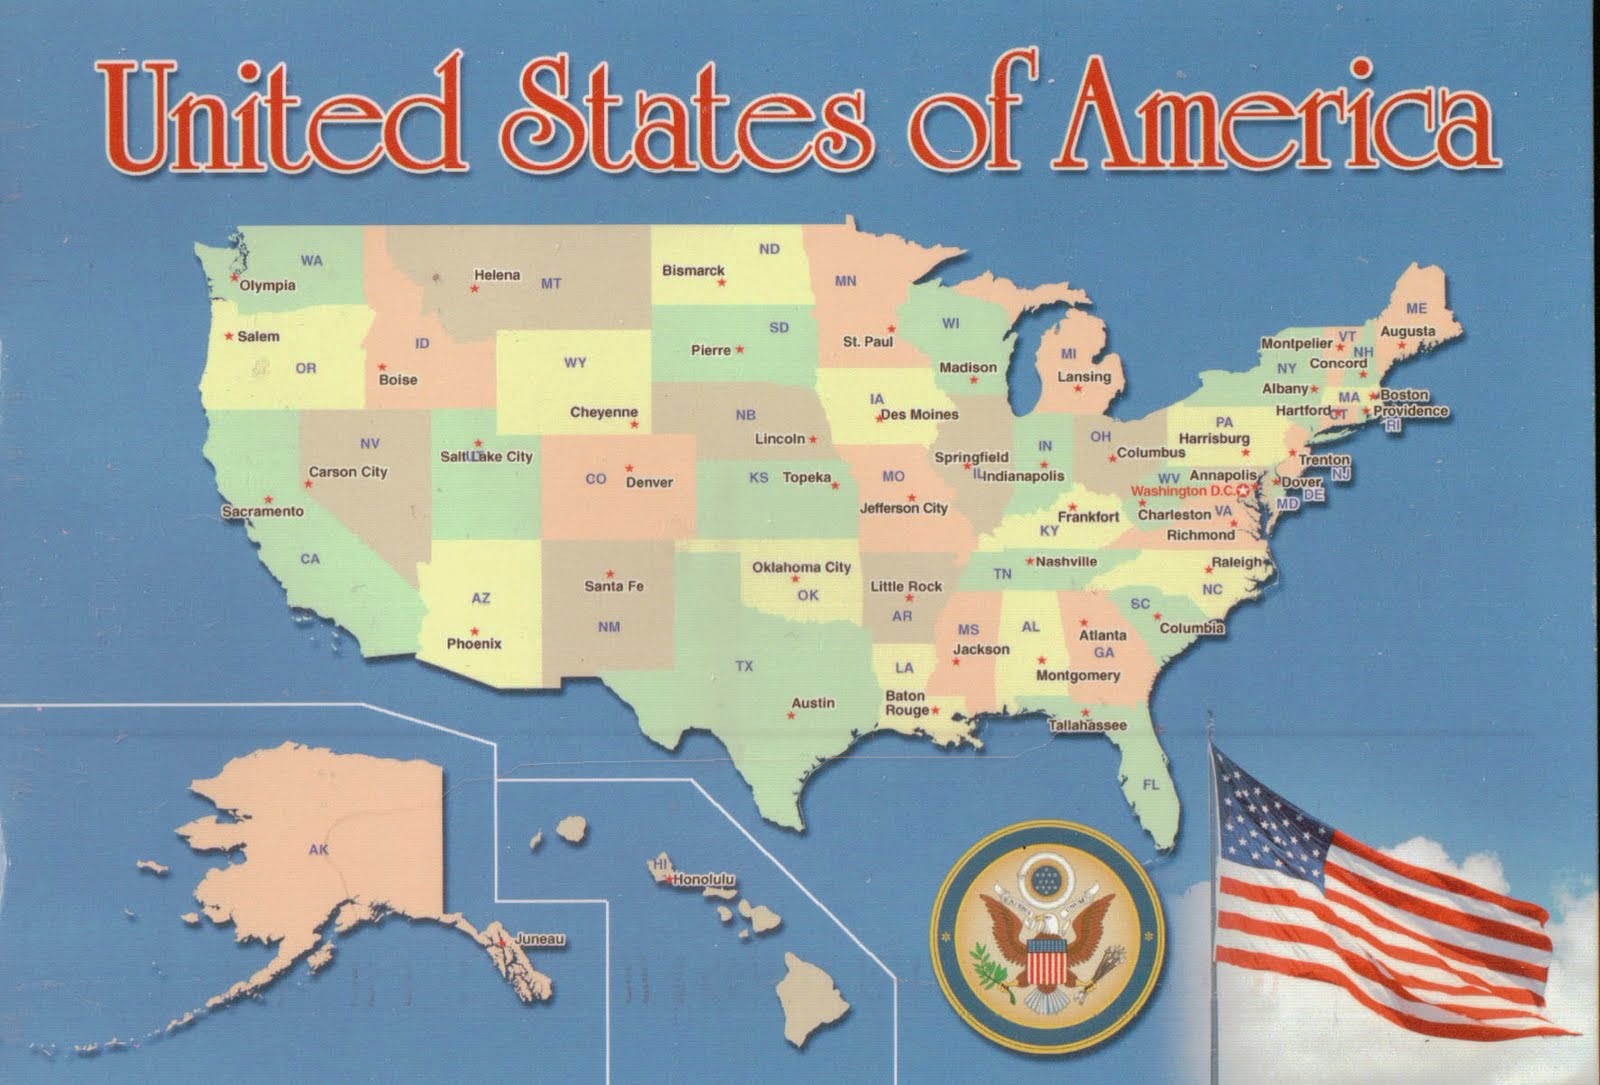 English is FUNtastic: USA states & capitals - video and map